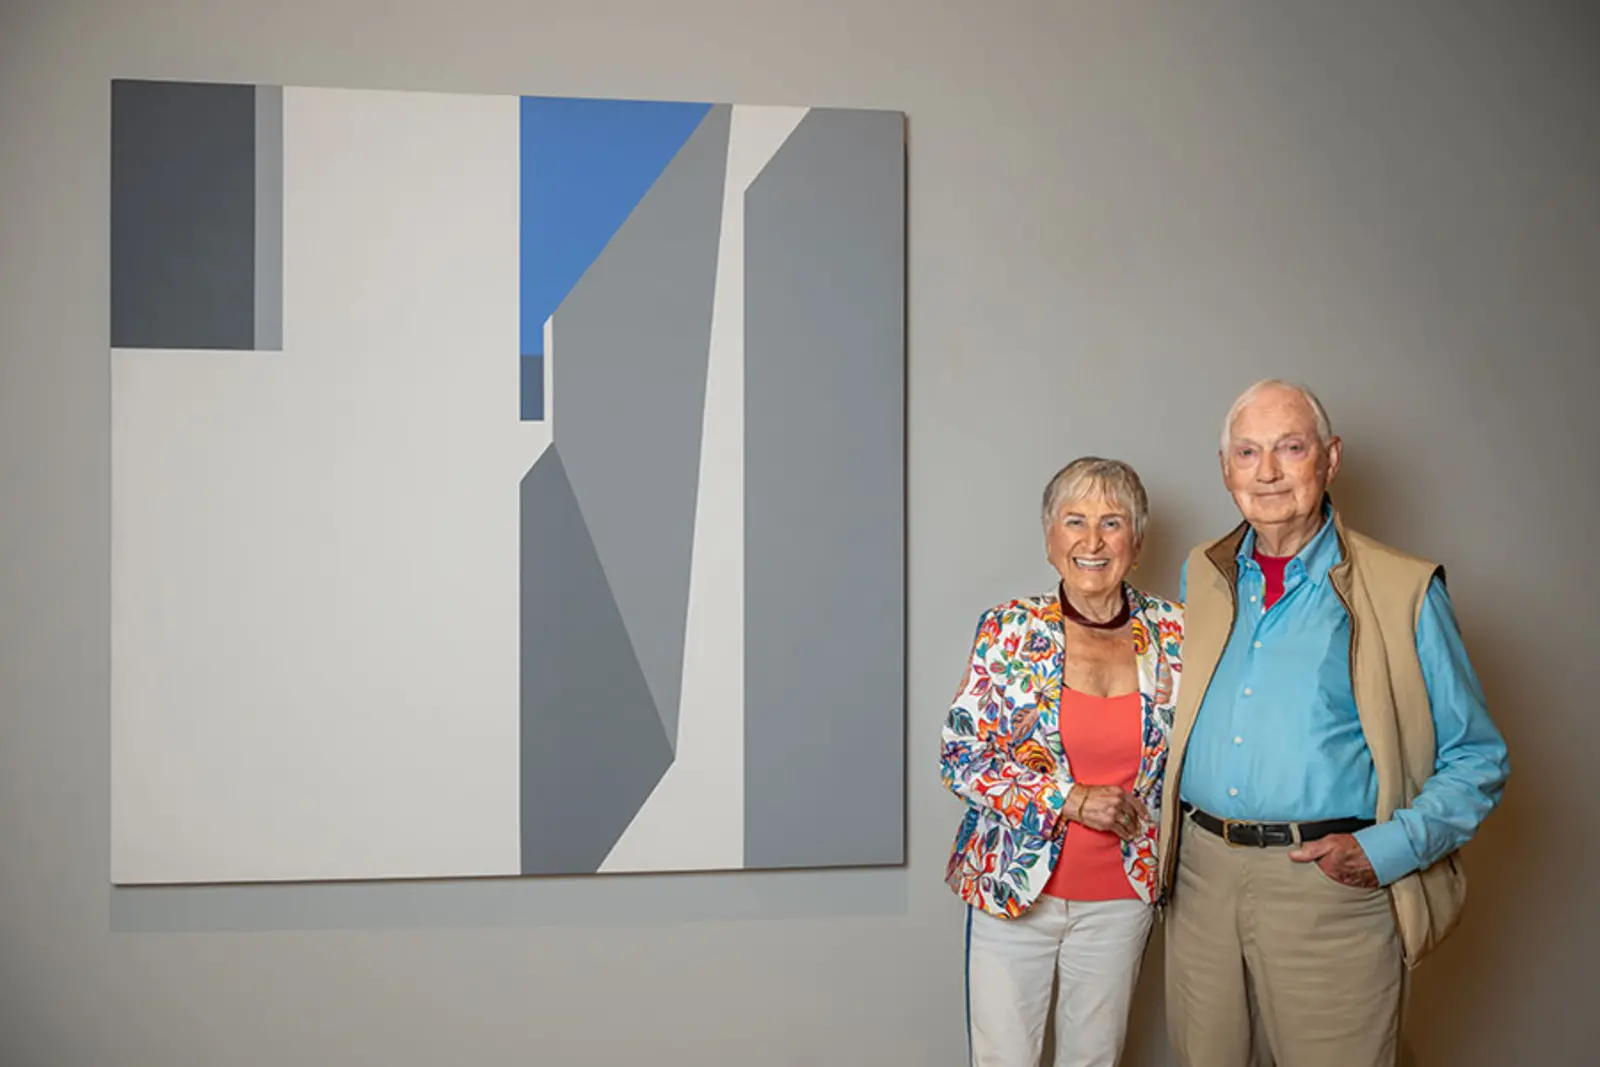 Two people pose next to an art piece on a wall.